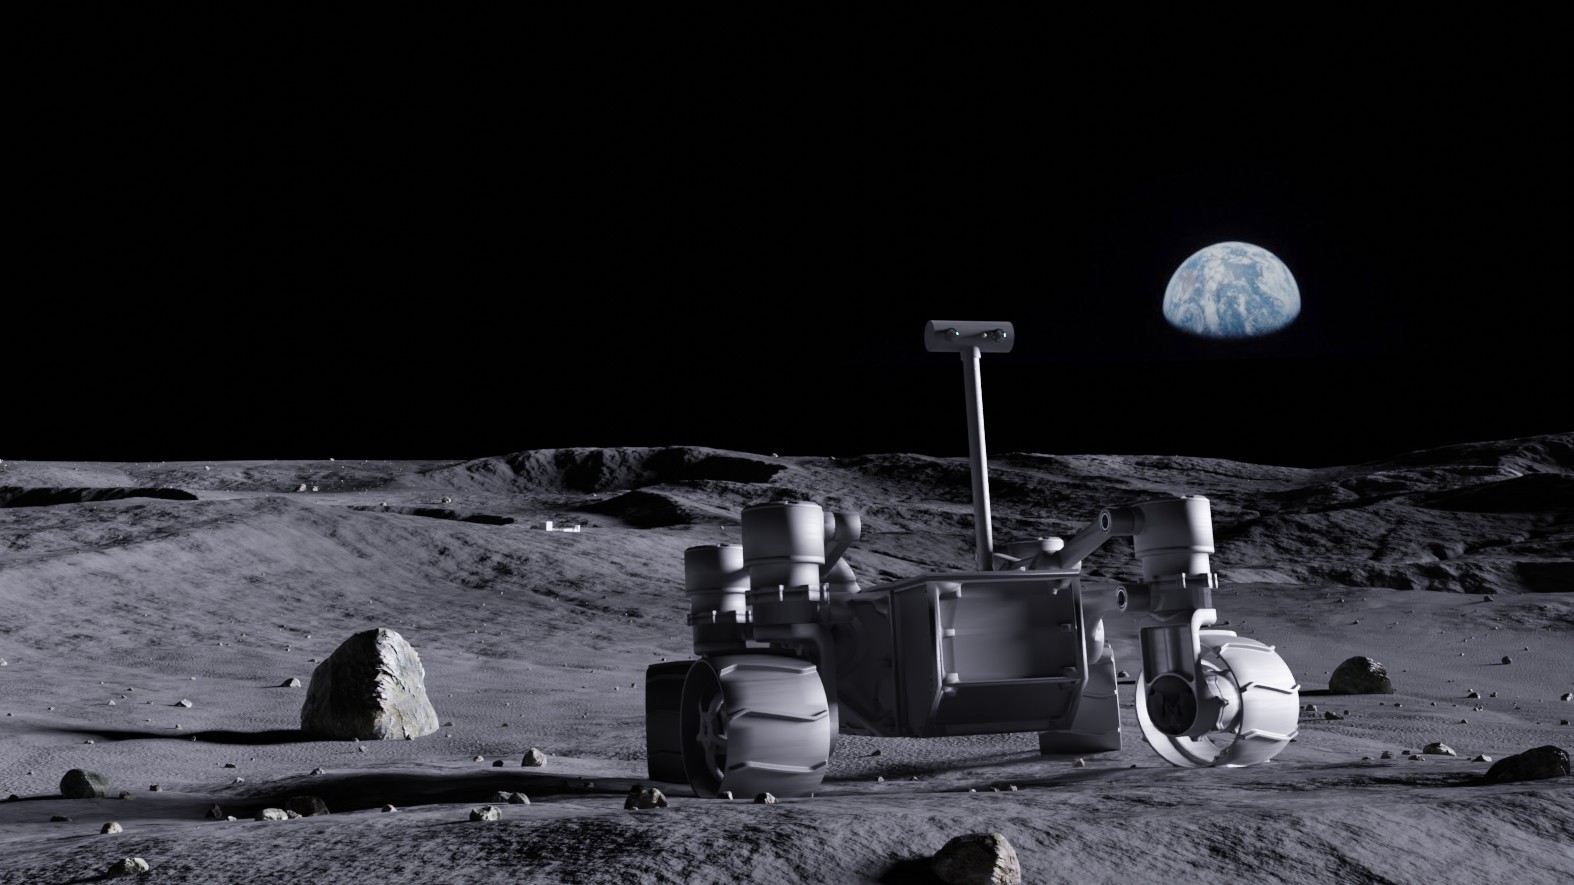 R1 rover on the Moon, with the Earth in the background